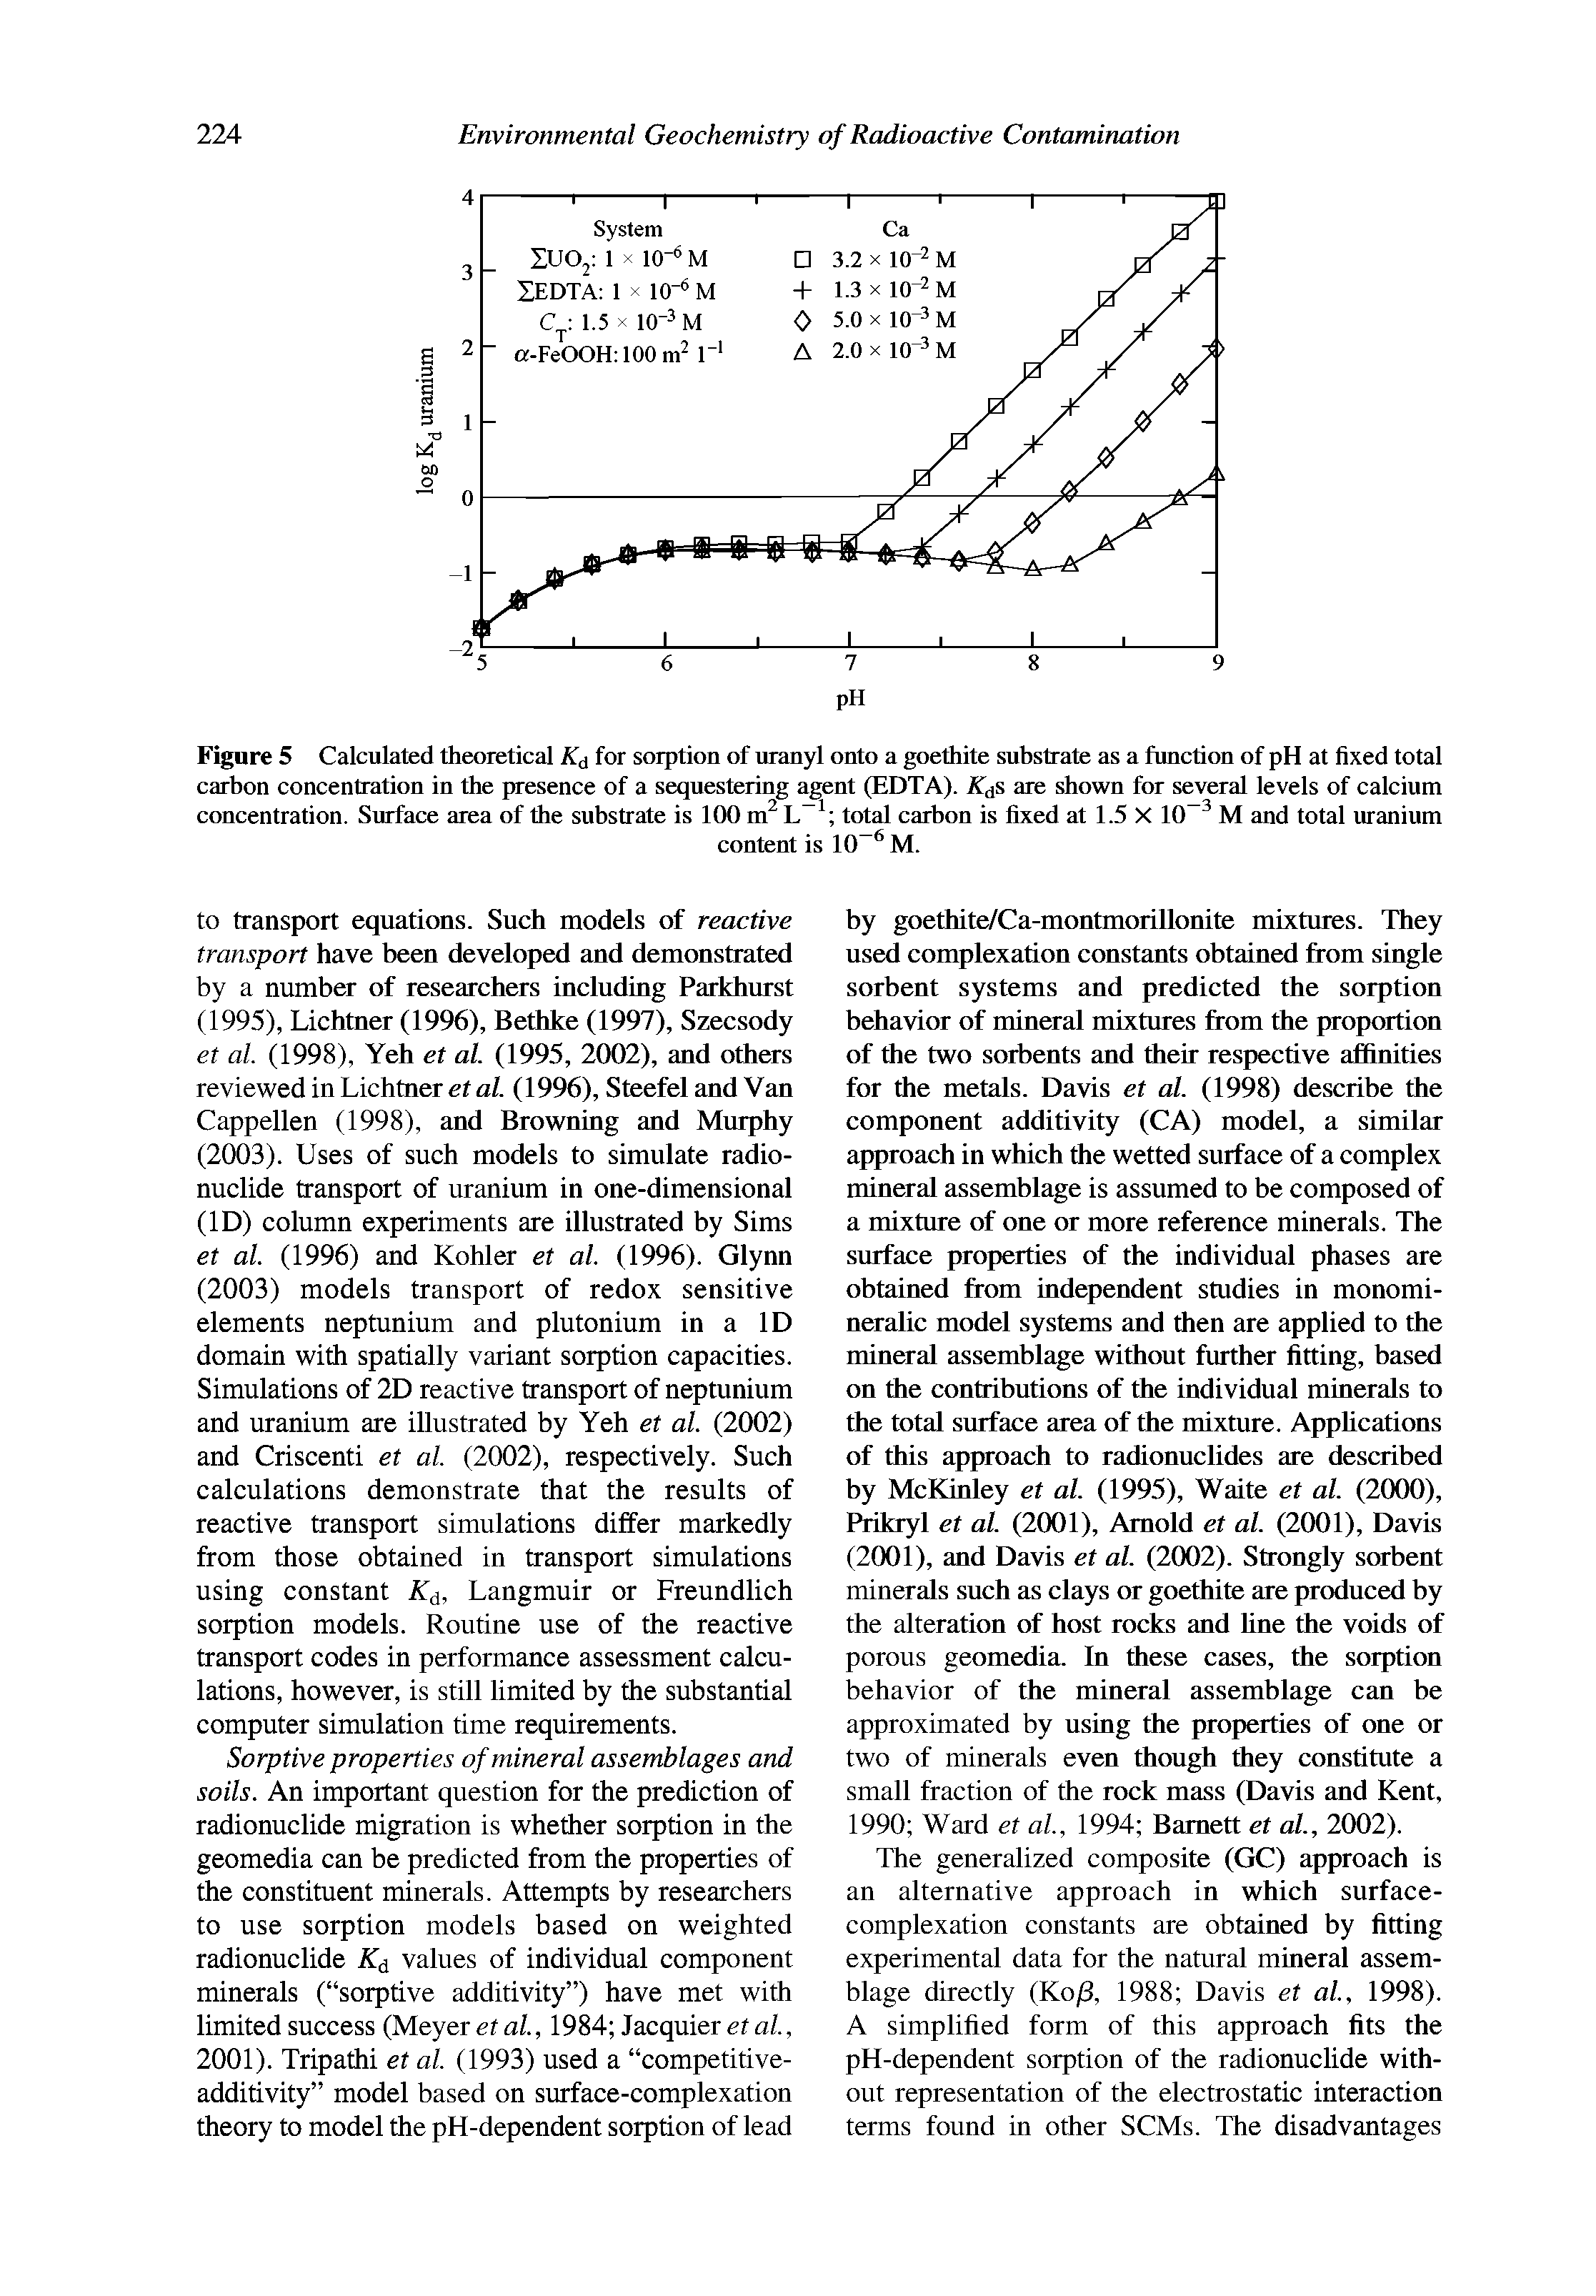 Figure 5 Calculated theoretical for sorption of uranyl onto a goethite substrate as a function of pH at fixed total carbon concentration in the presence of a sequestering agent (EDTA). are shown for several levels of calcium concentration. Surface area of the substrate is 100 L total carbon is fixed at 1.5 X 10 M and total uranium...